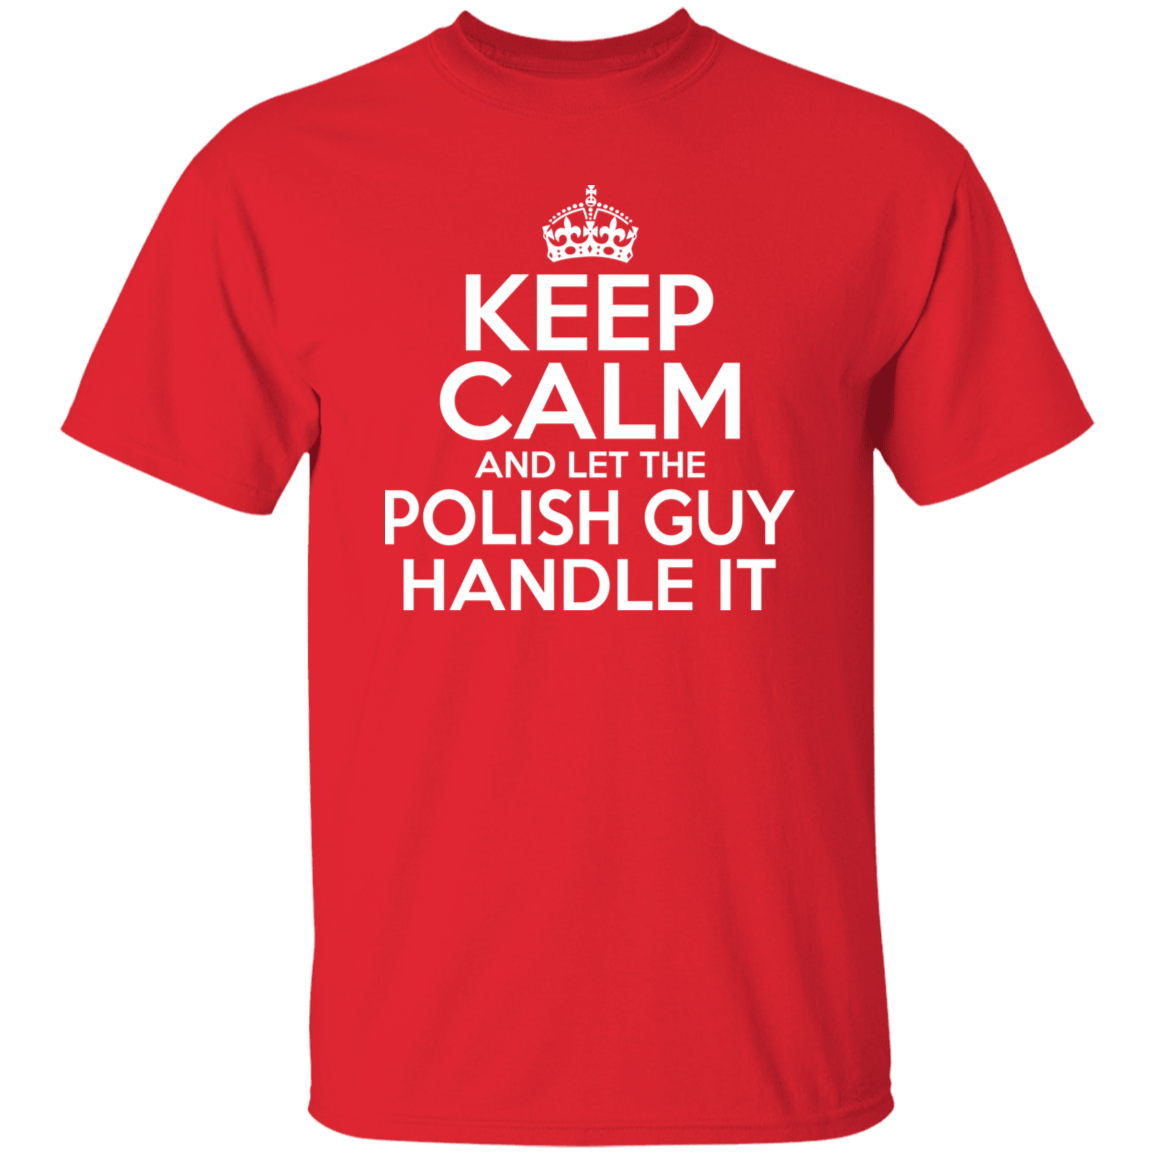 Keep Calm And Let The Polish Guy Handle It Apparel CustomCat G500 5.3 oz. T-Shirt Red S